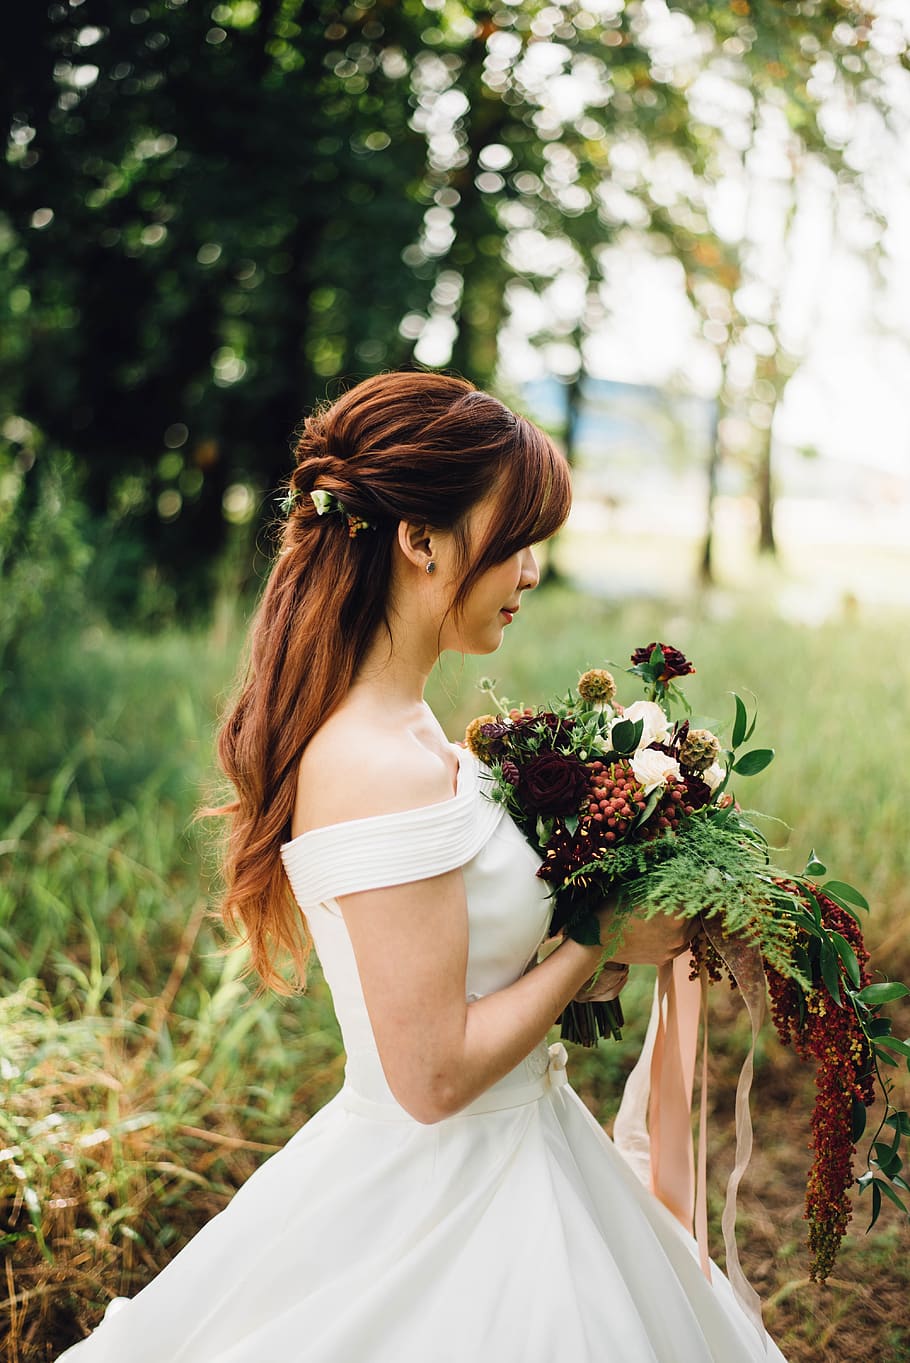 white, long, dress, bride, wedding, gown, people, girl, bouquet, nature